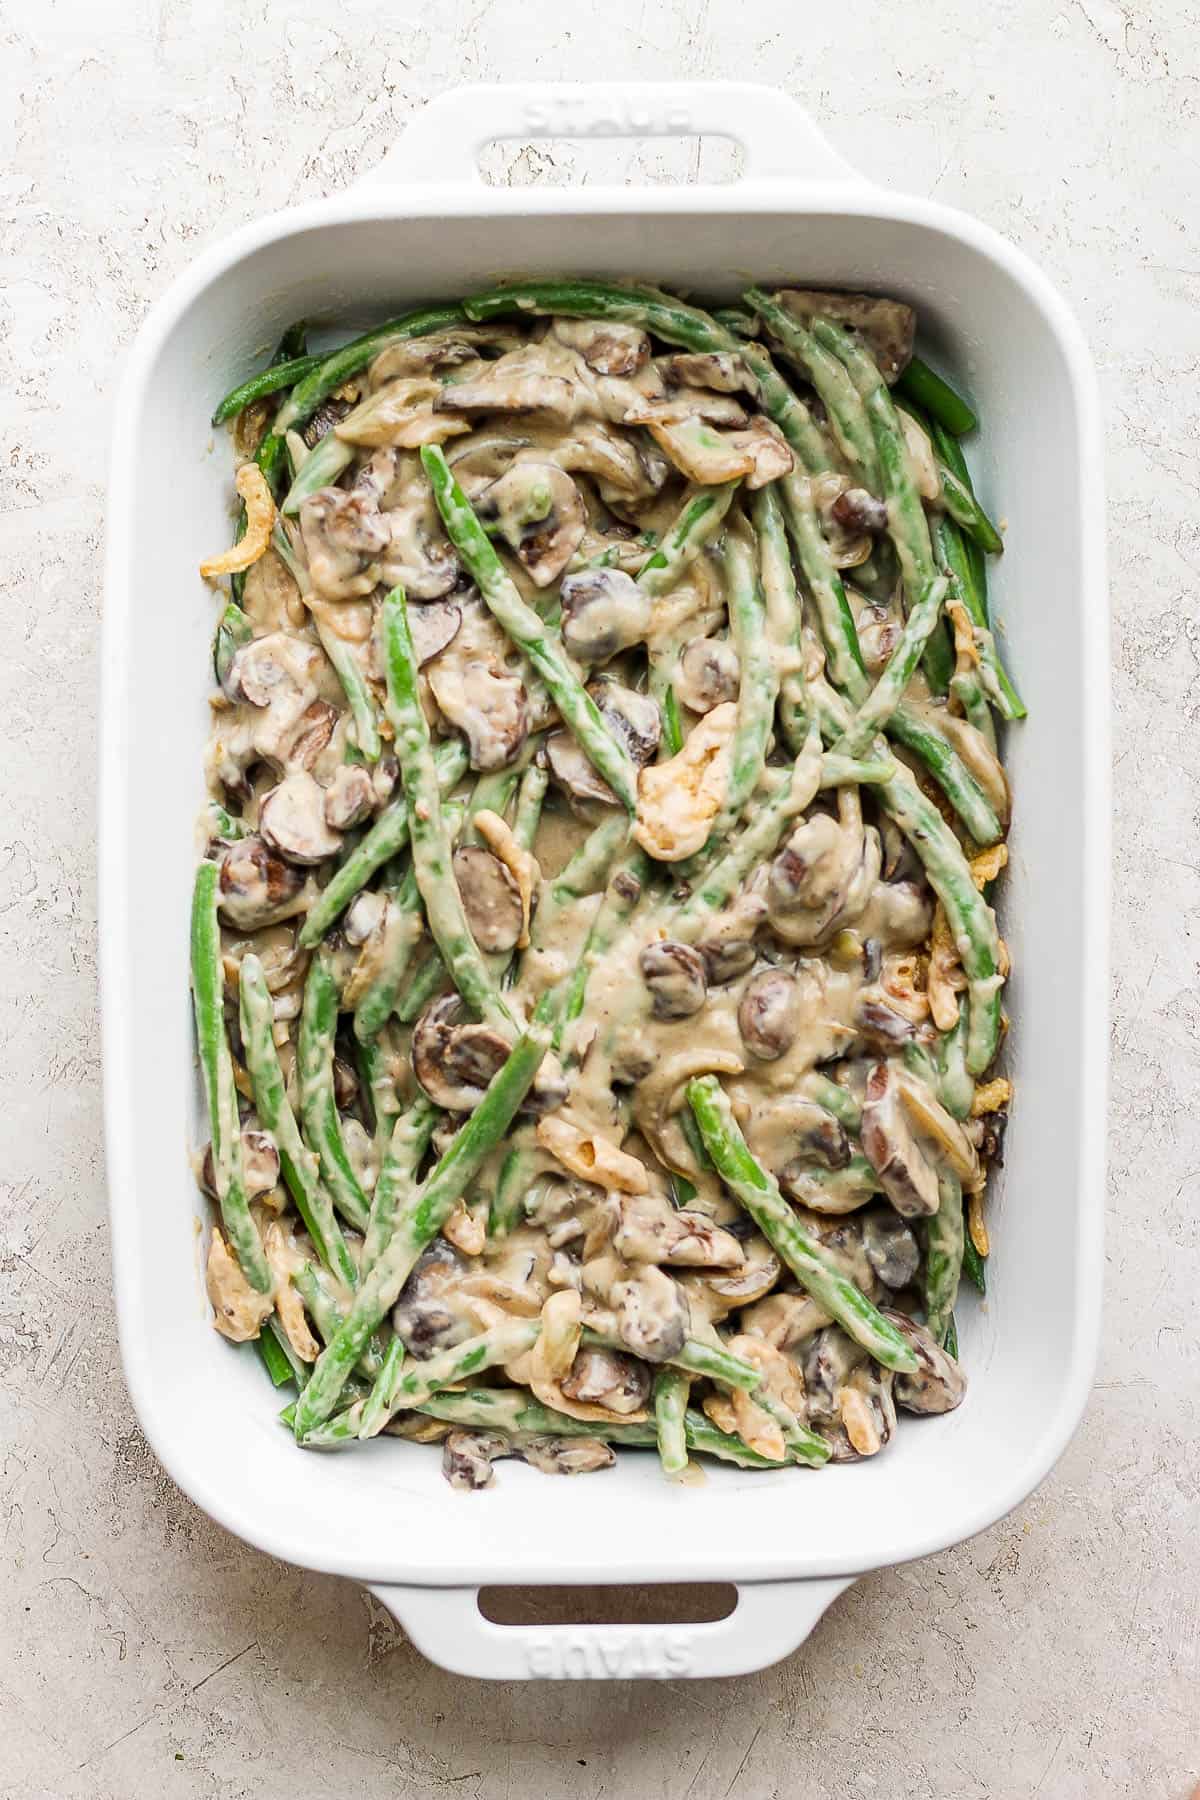 The entire green bean casserole fully mixed and ready to bake in a white casserole dish.